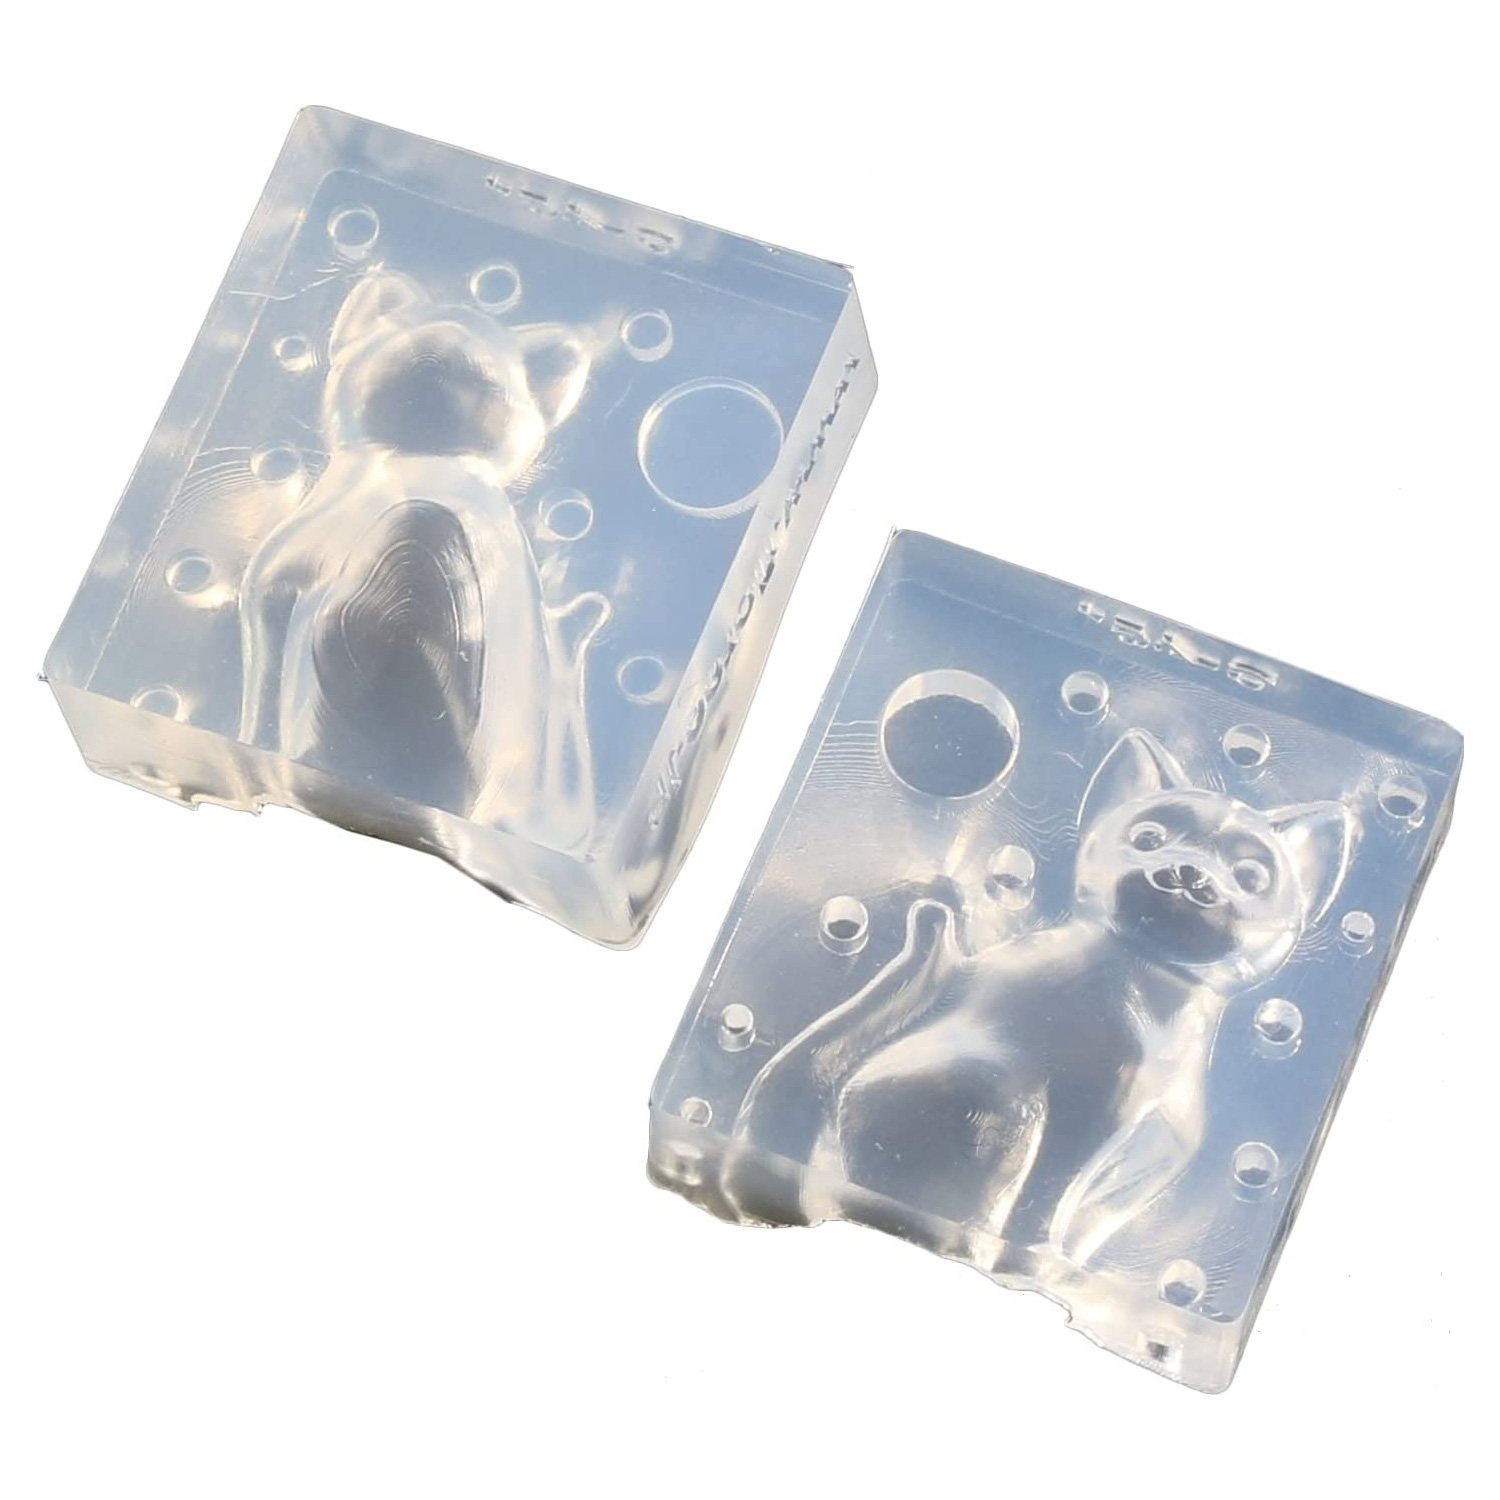 KAM-REJ-451  Resin Crafting Silicone Mold  (pcs)